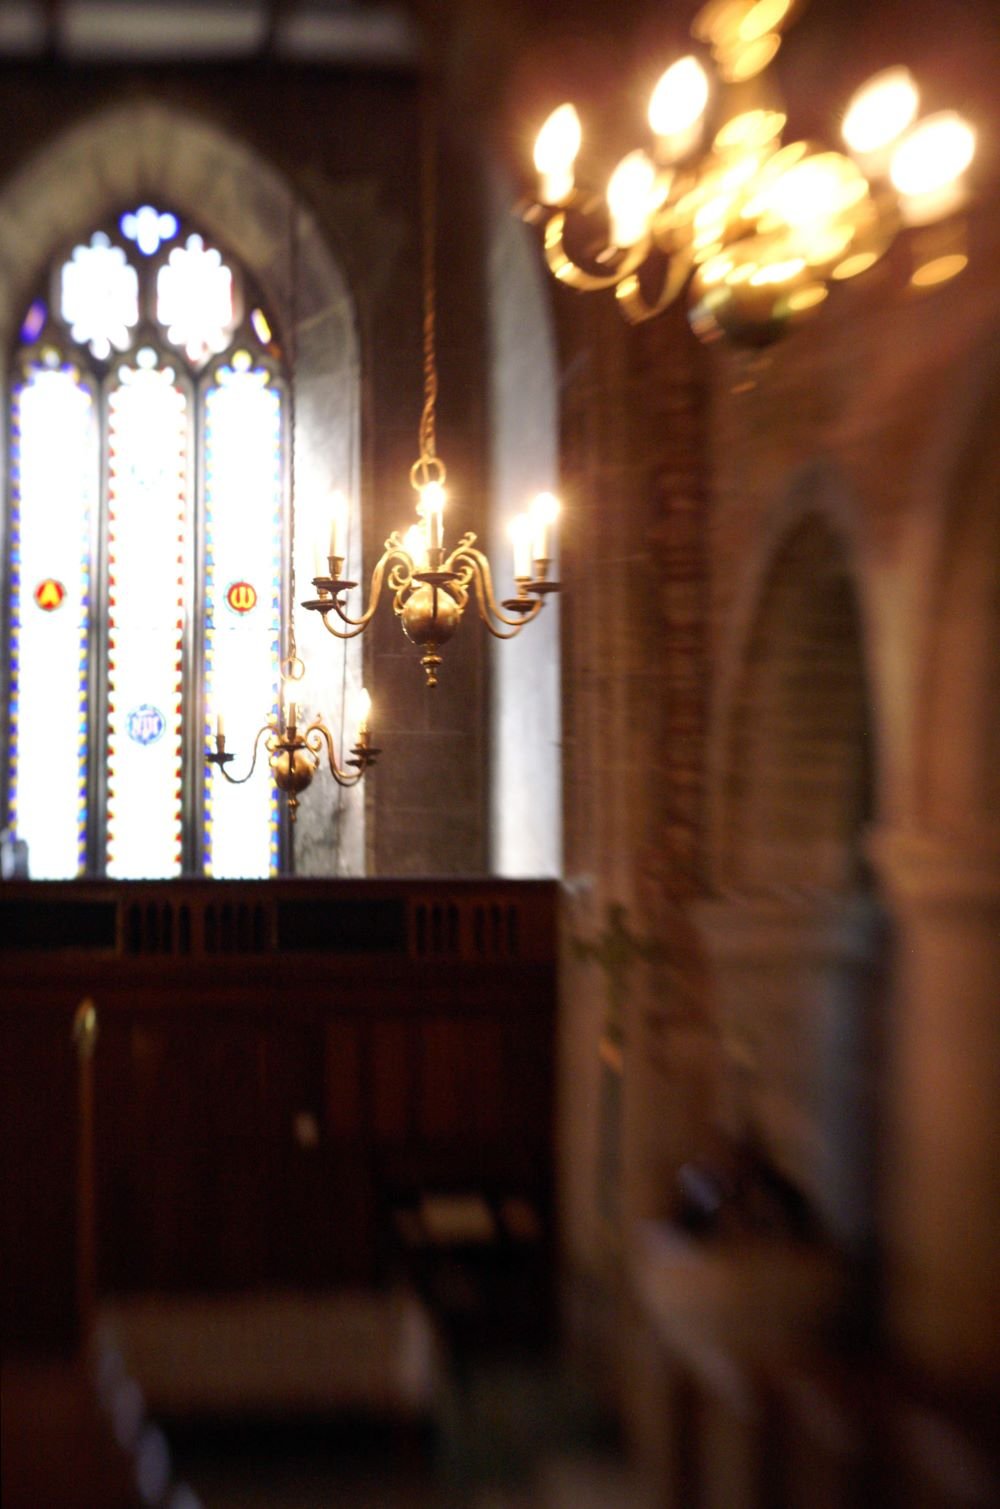 Image shows lighting within the interior of a church in soft focus